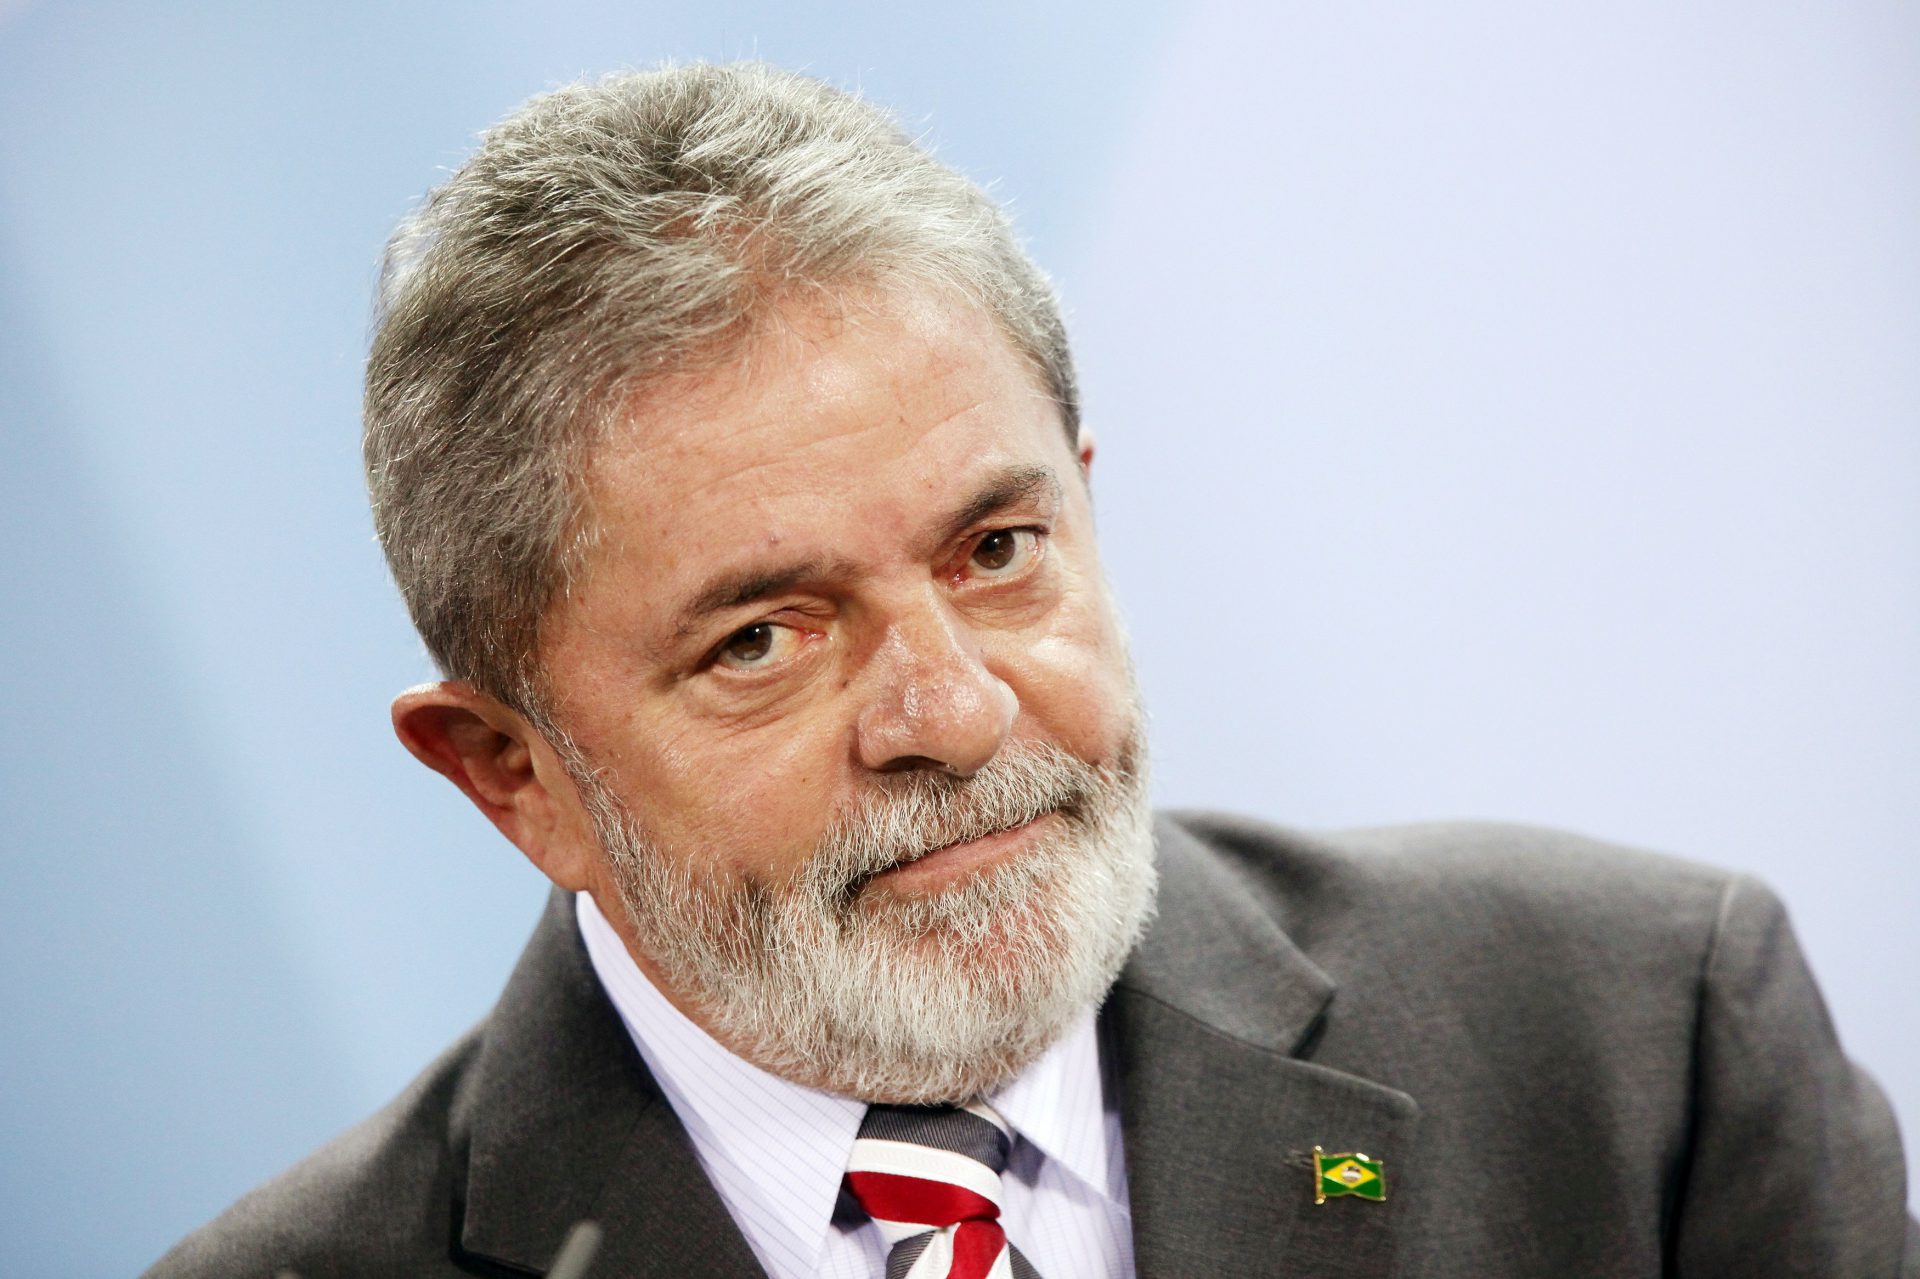 BRICS: Brazil President Lula Suggests a Trading Currency Other Than US Dollar